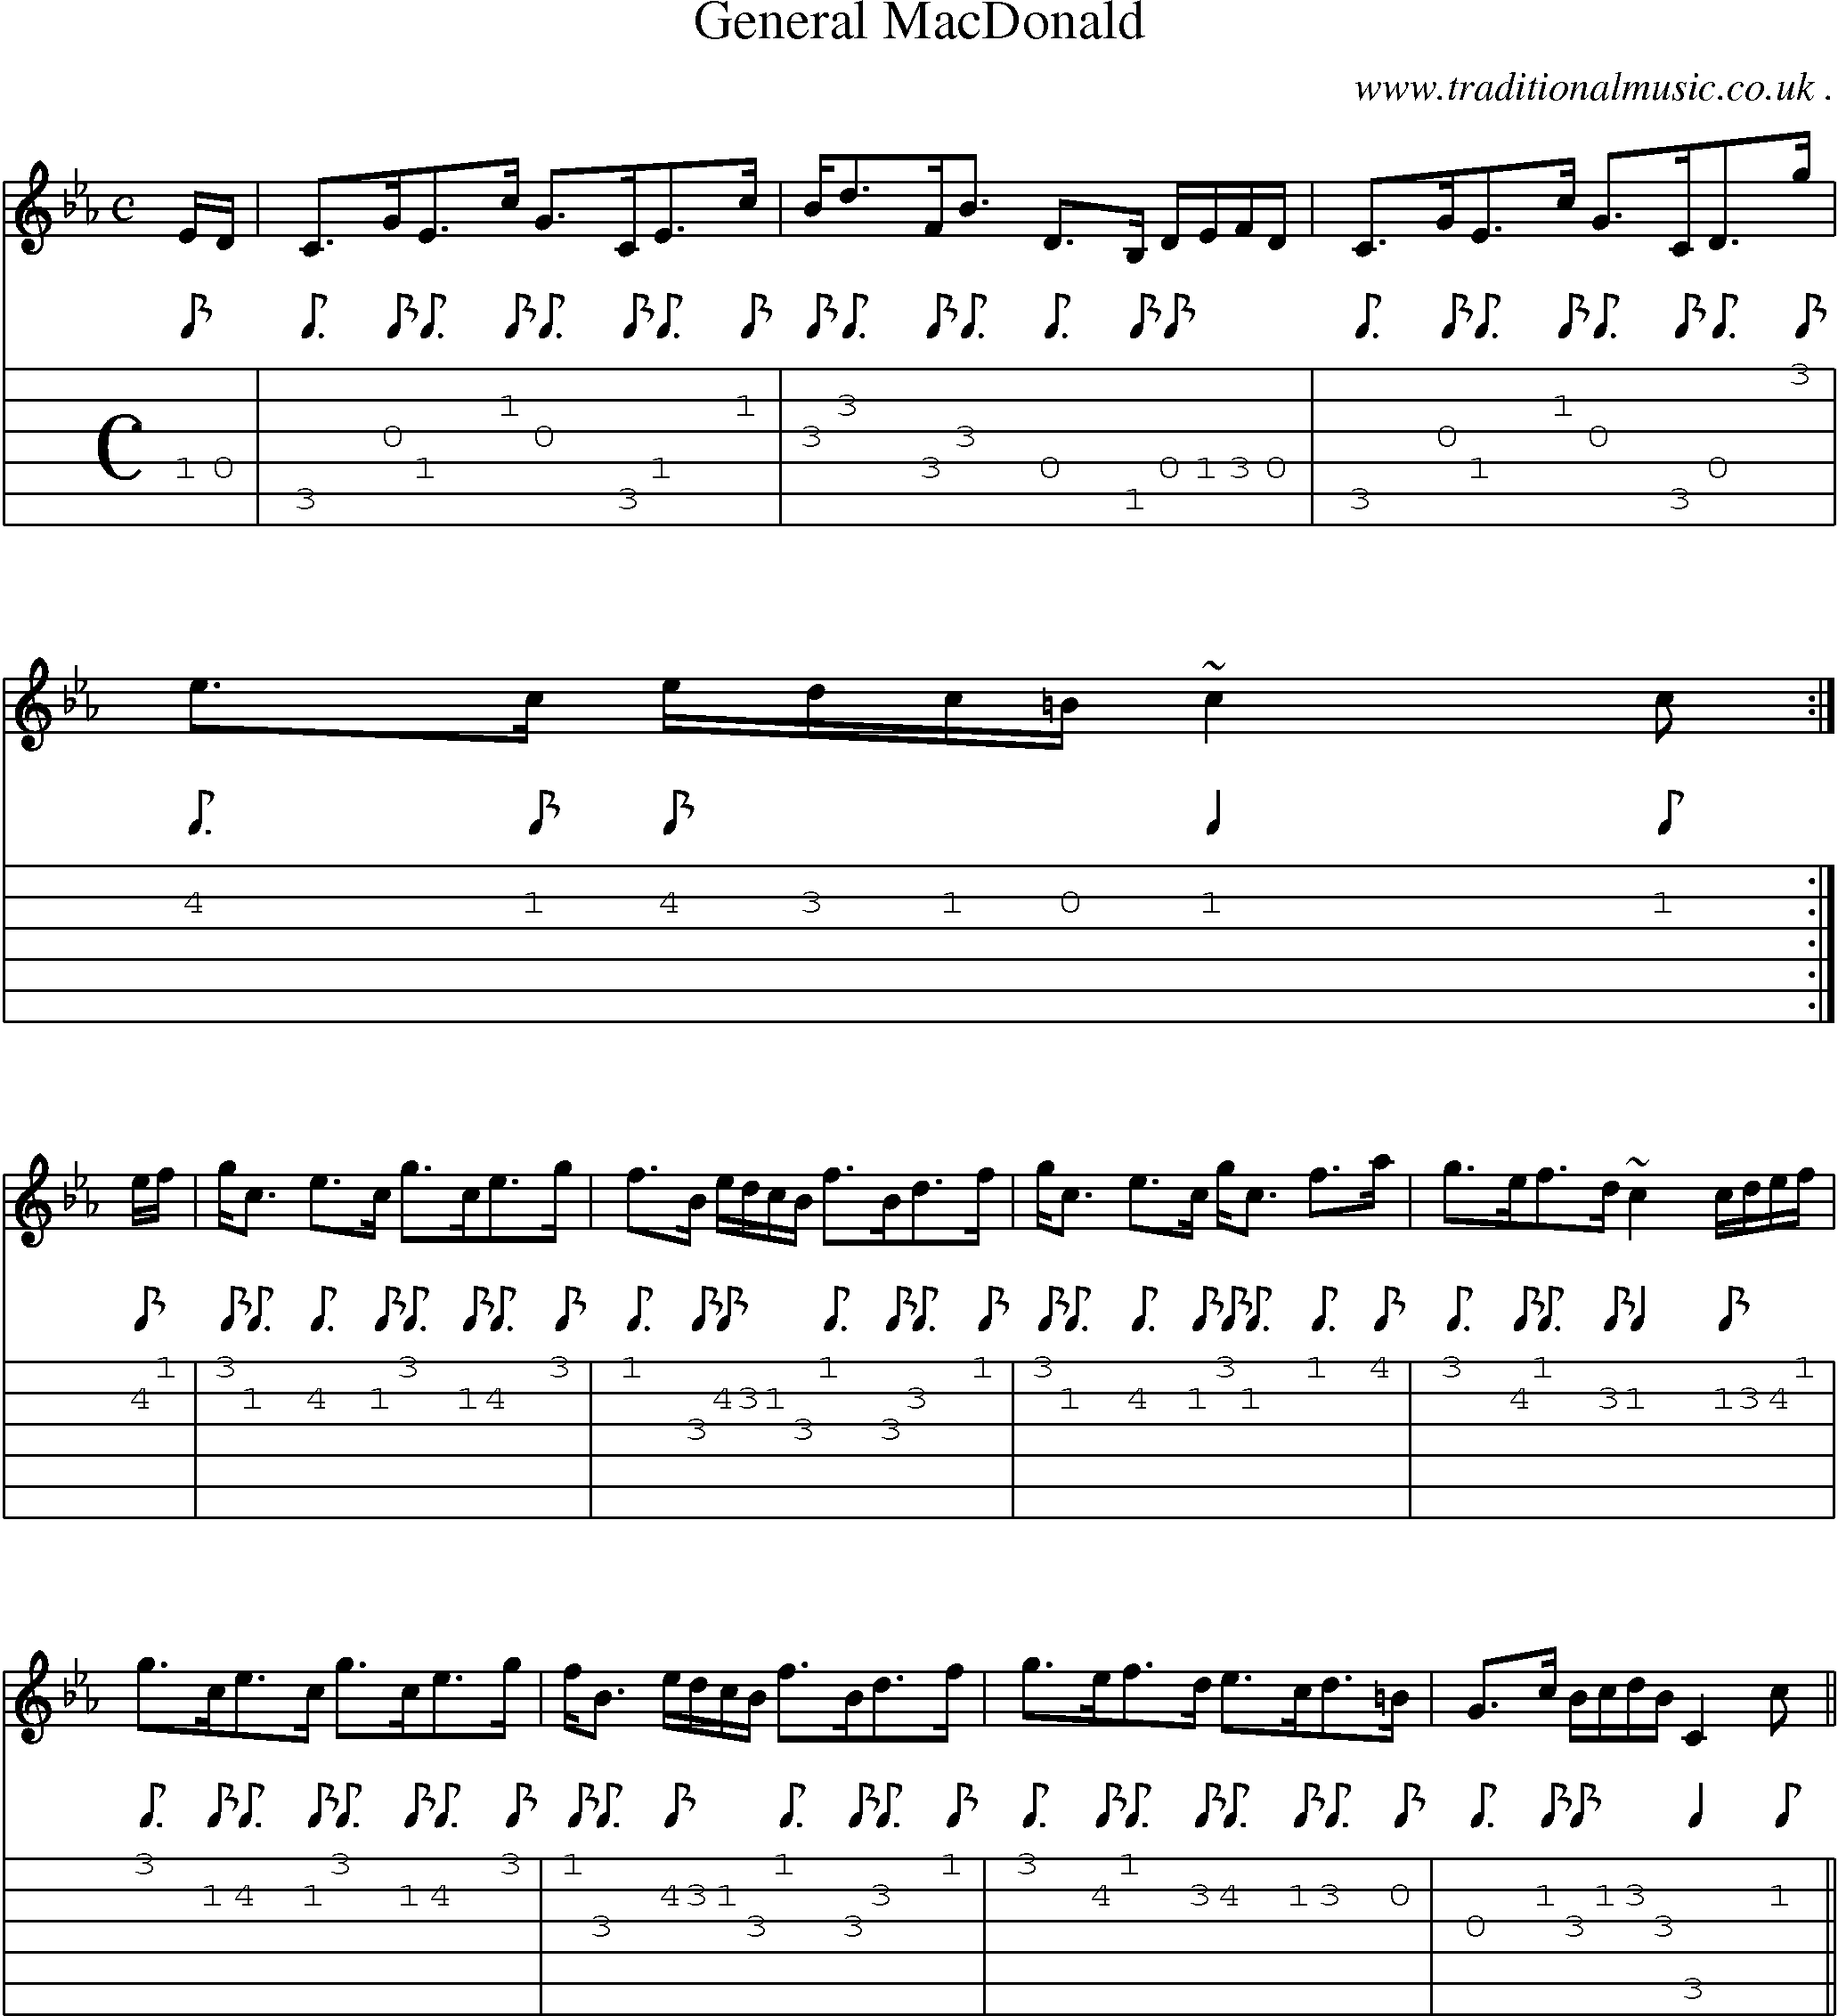 Sheet-music  score, Chords and Guitar Tabs for General Macdonald